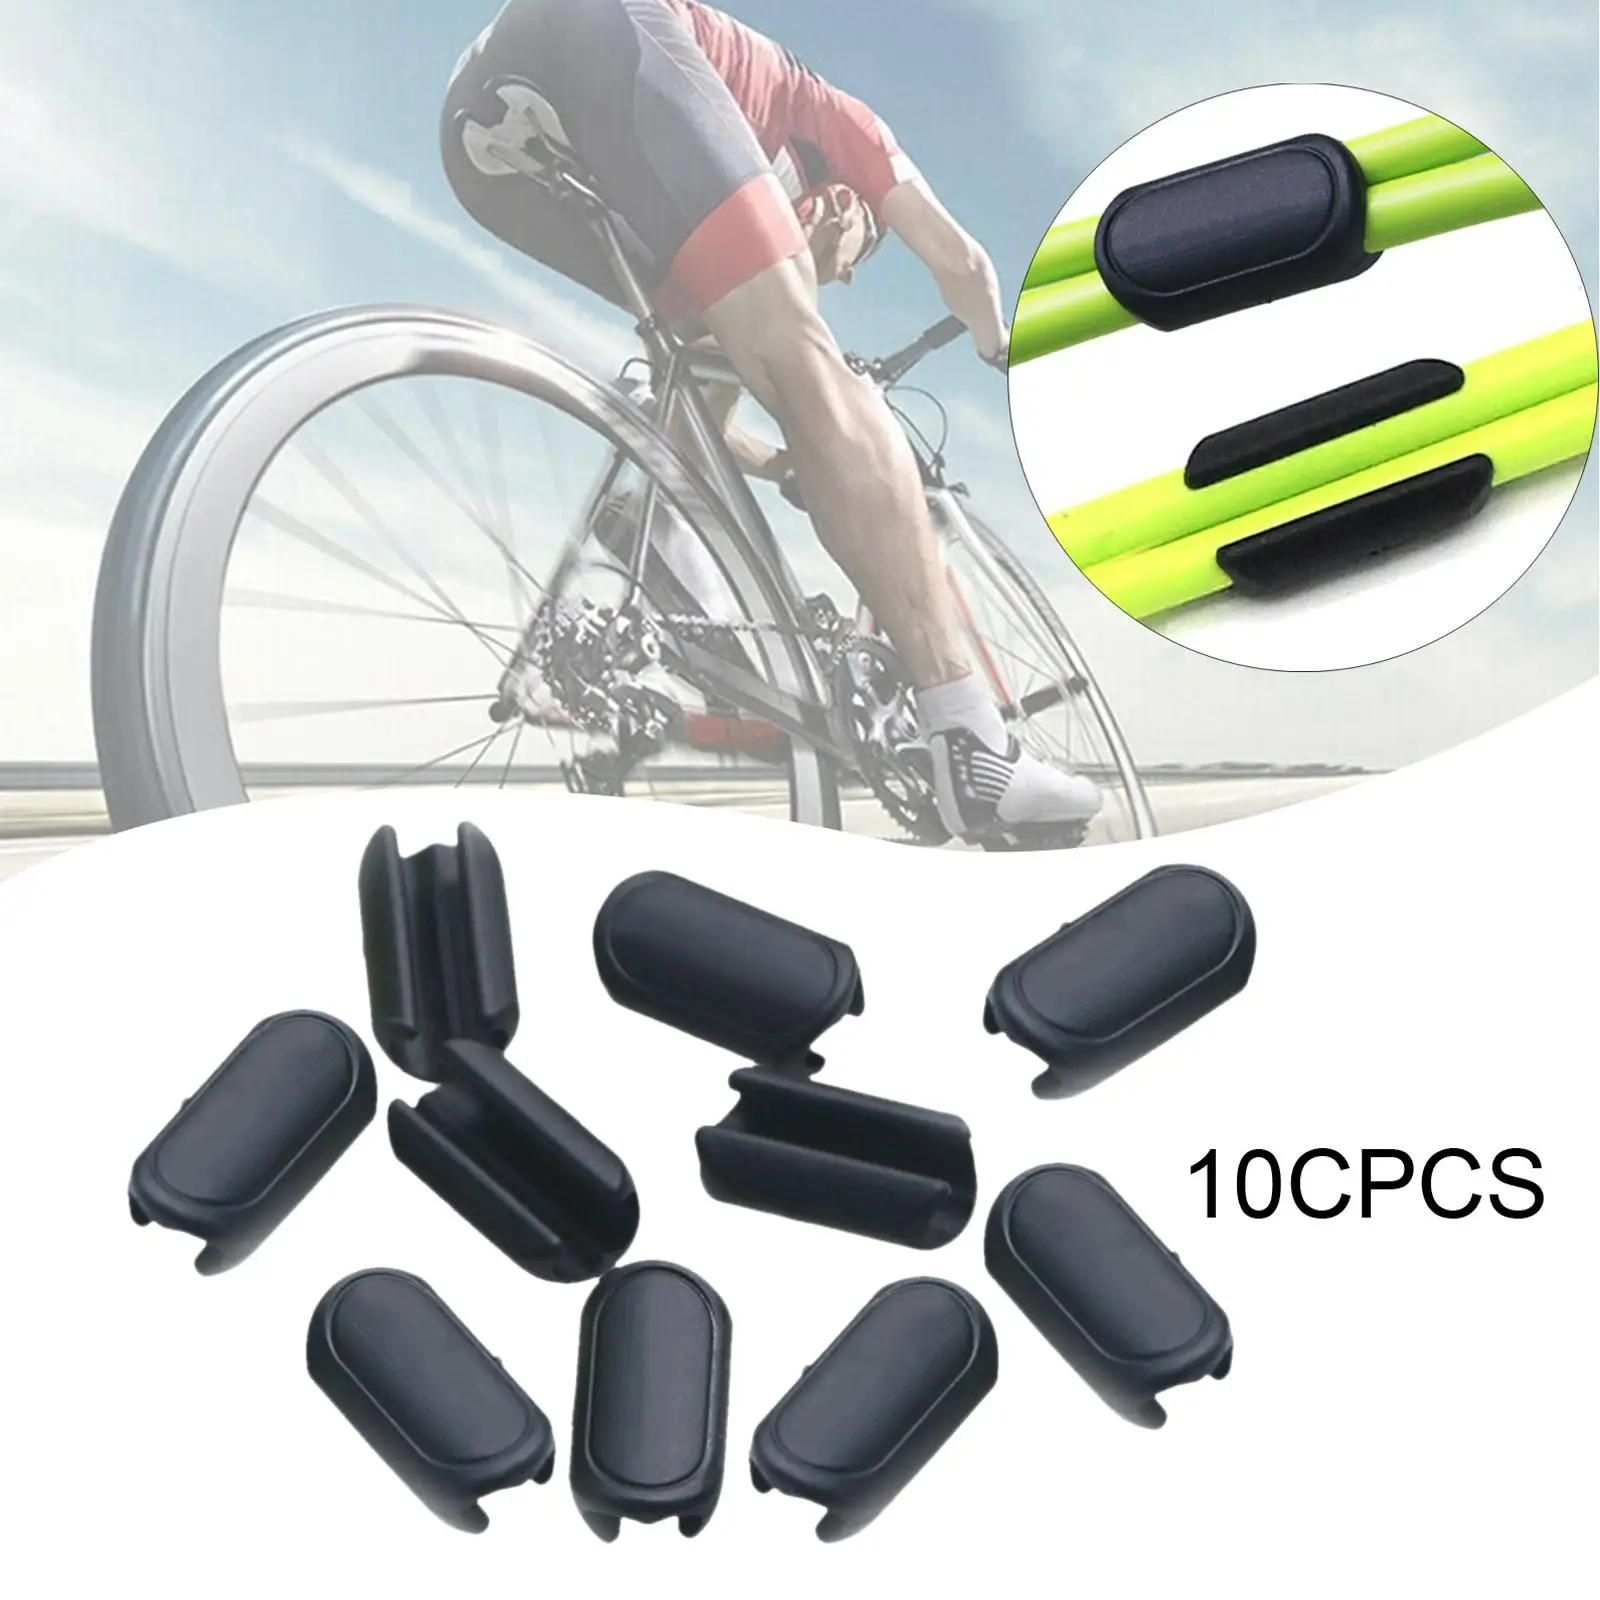 10x Bike Cable Clips Bicycle Housing Tidy Clips for Road Bicycle Brake Cable